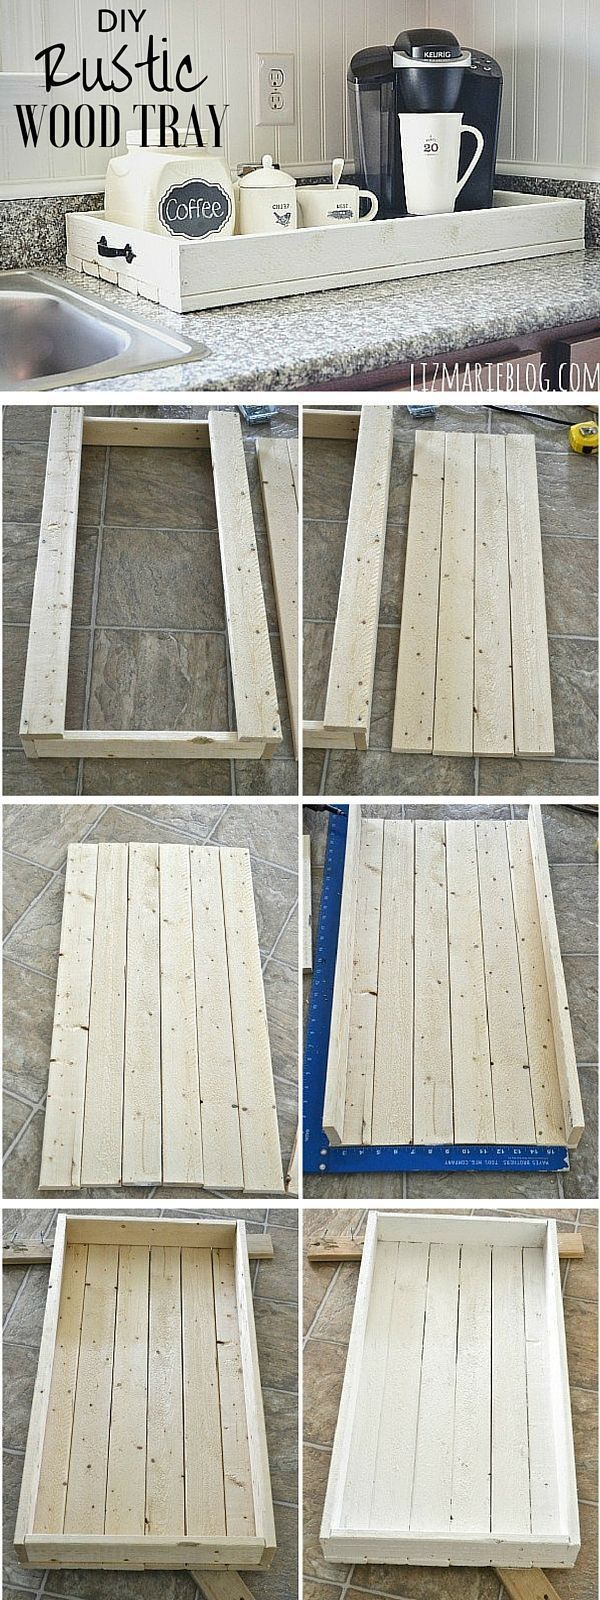 Check out the tutorial: DIY Rustic Wood Tray /istandarddesign/